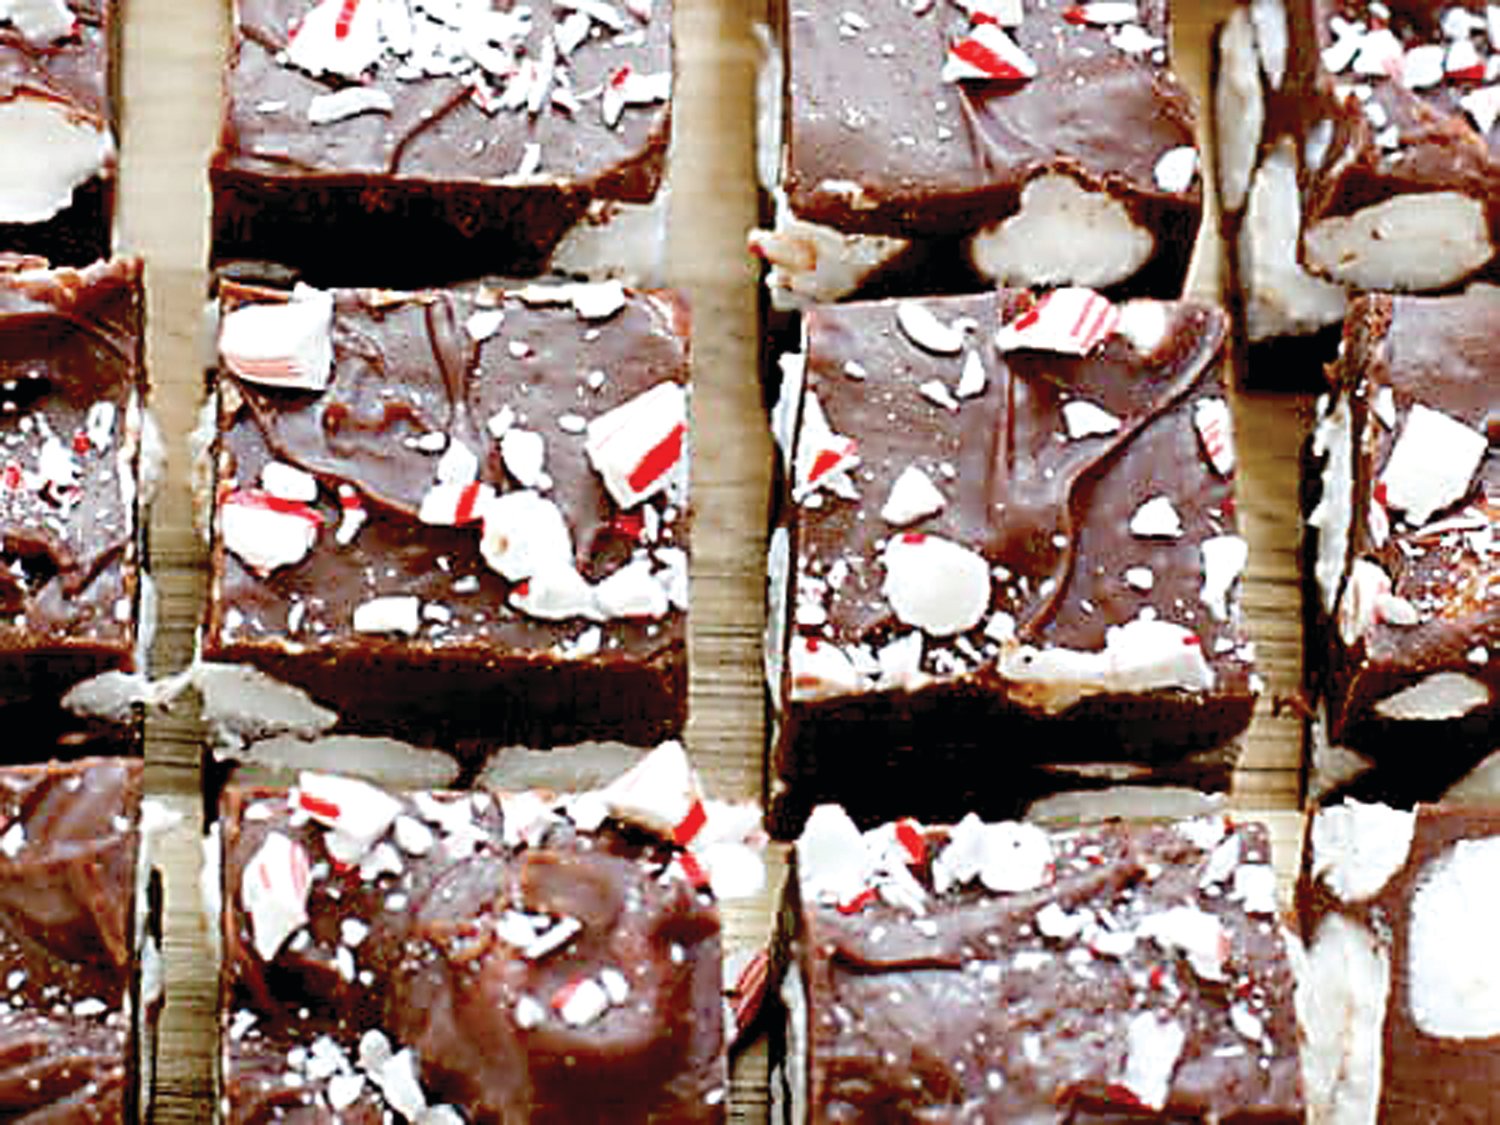 Chocolate fudge gets something extra with seasonal crushed candy canes and chopped up marshmallows in this easy recipe. Photograph by barefeetinthekitchen.com.